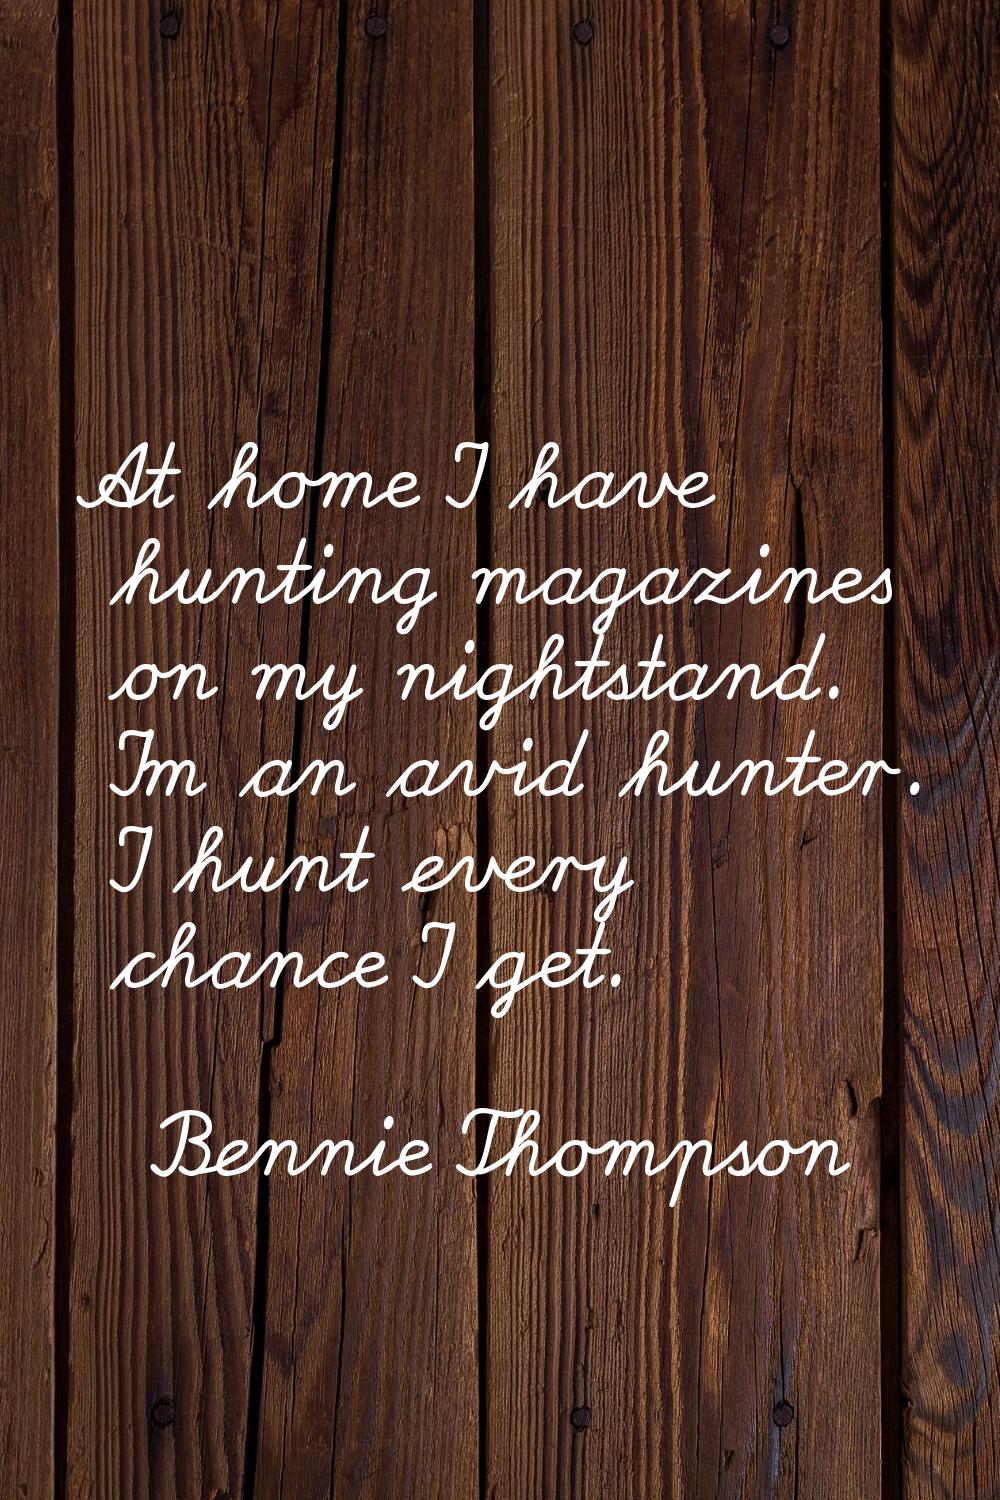 At home I have hunting magazines on my nightstand. I'm an avid hunter. I hunt every chance I get.